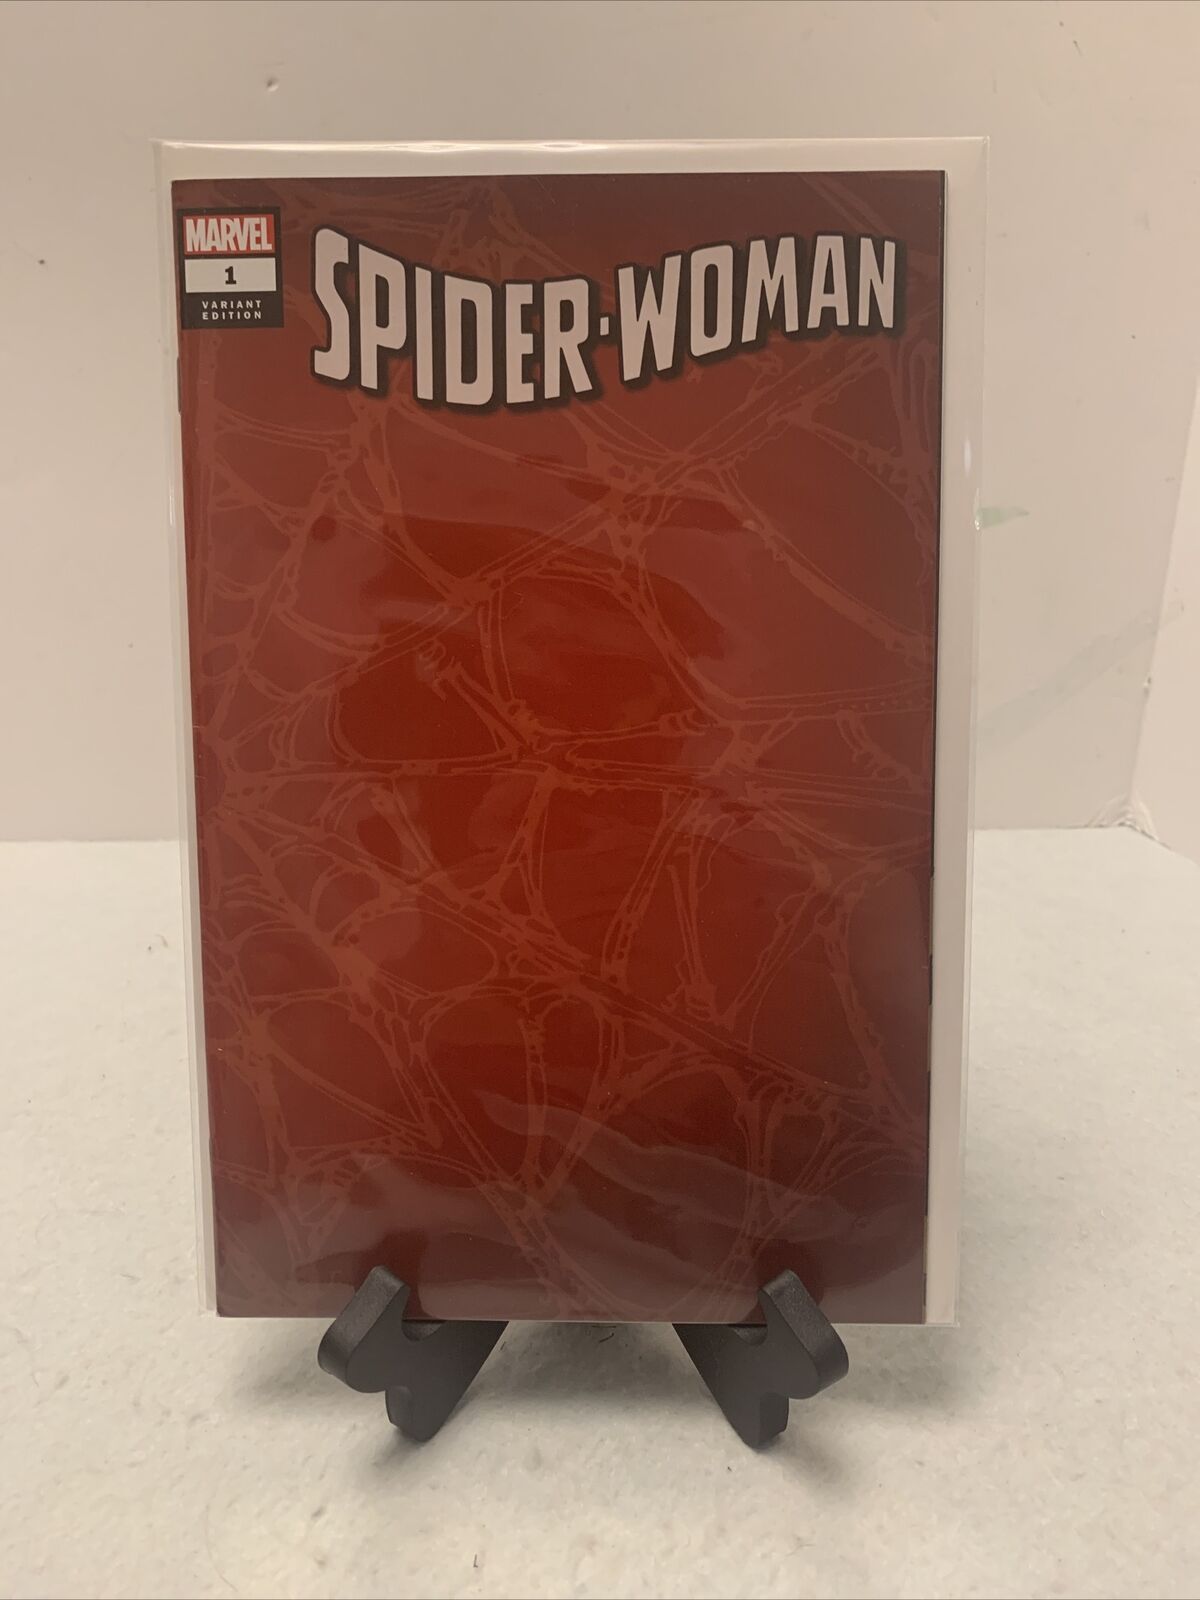 (2020) SPIDER-WOMAN #1 1:200 “BLANK” WEB VARIANT COVER